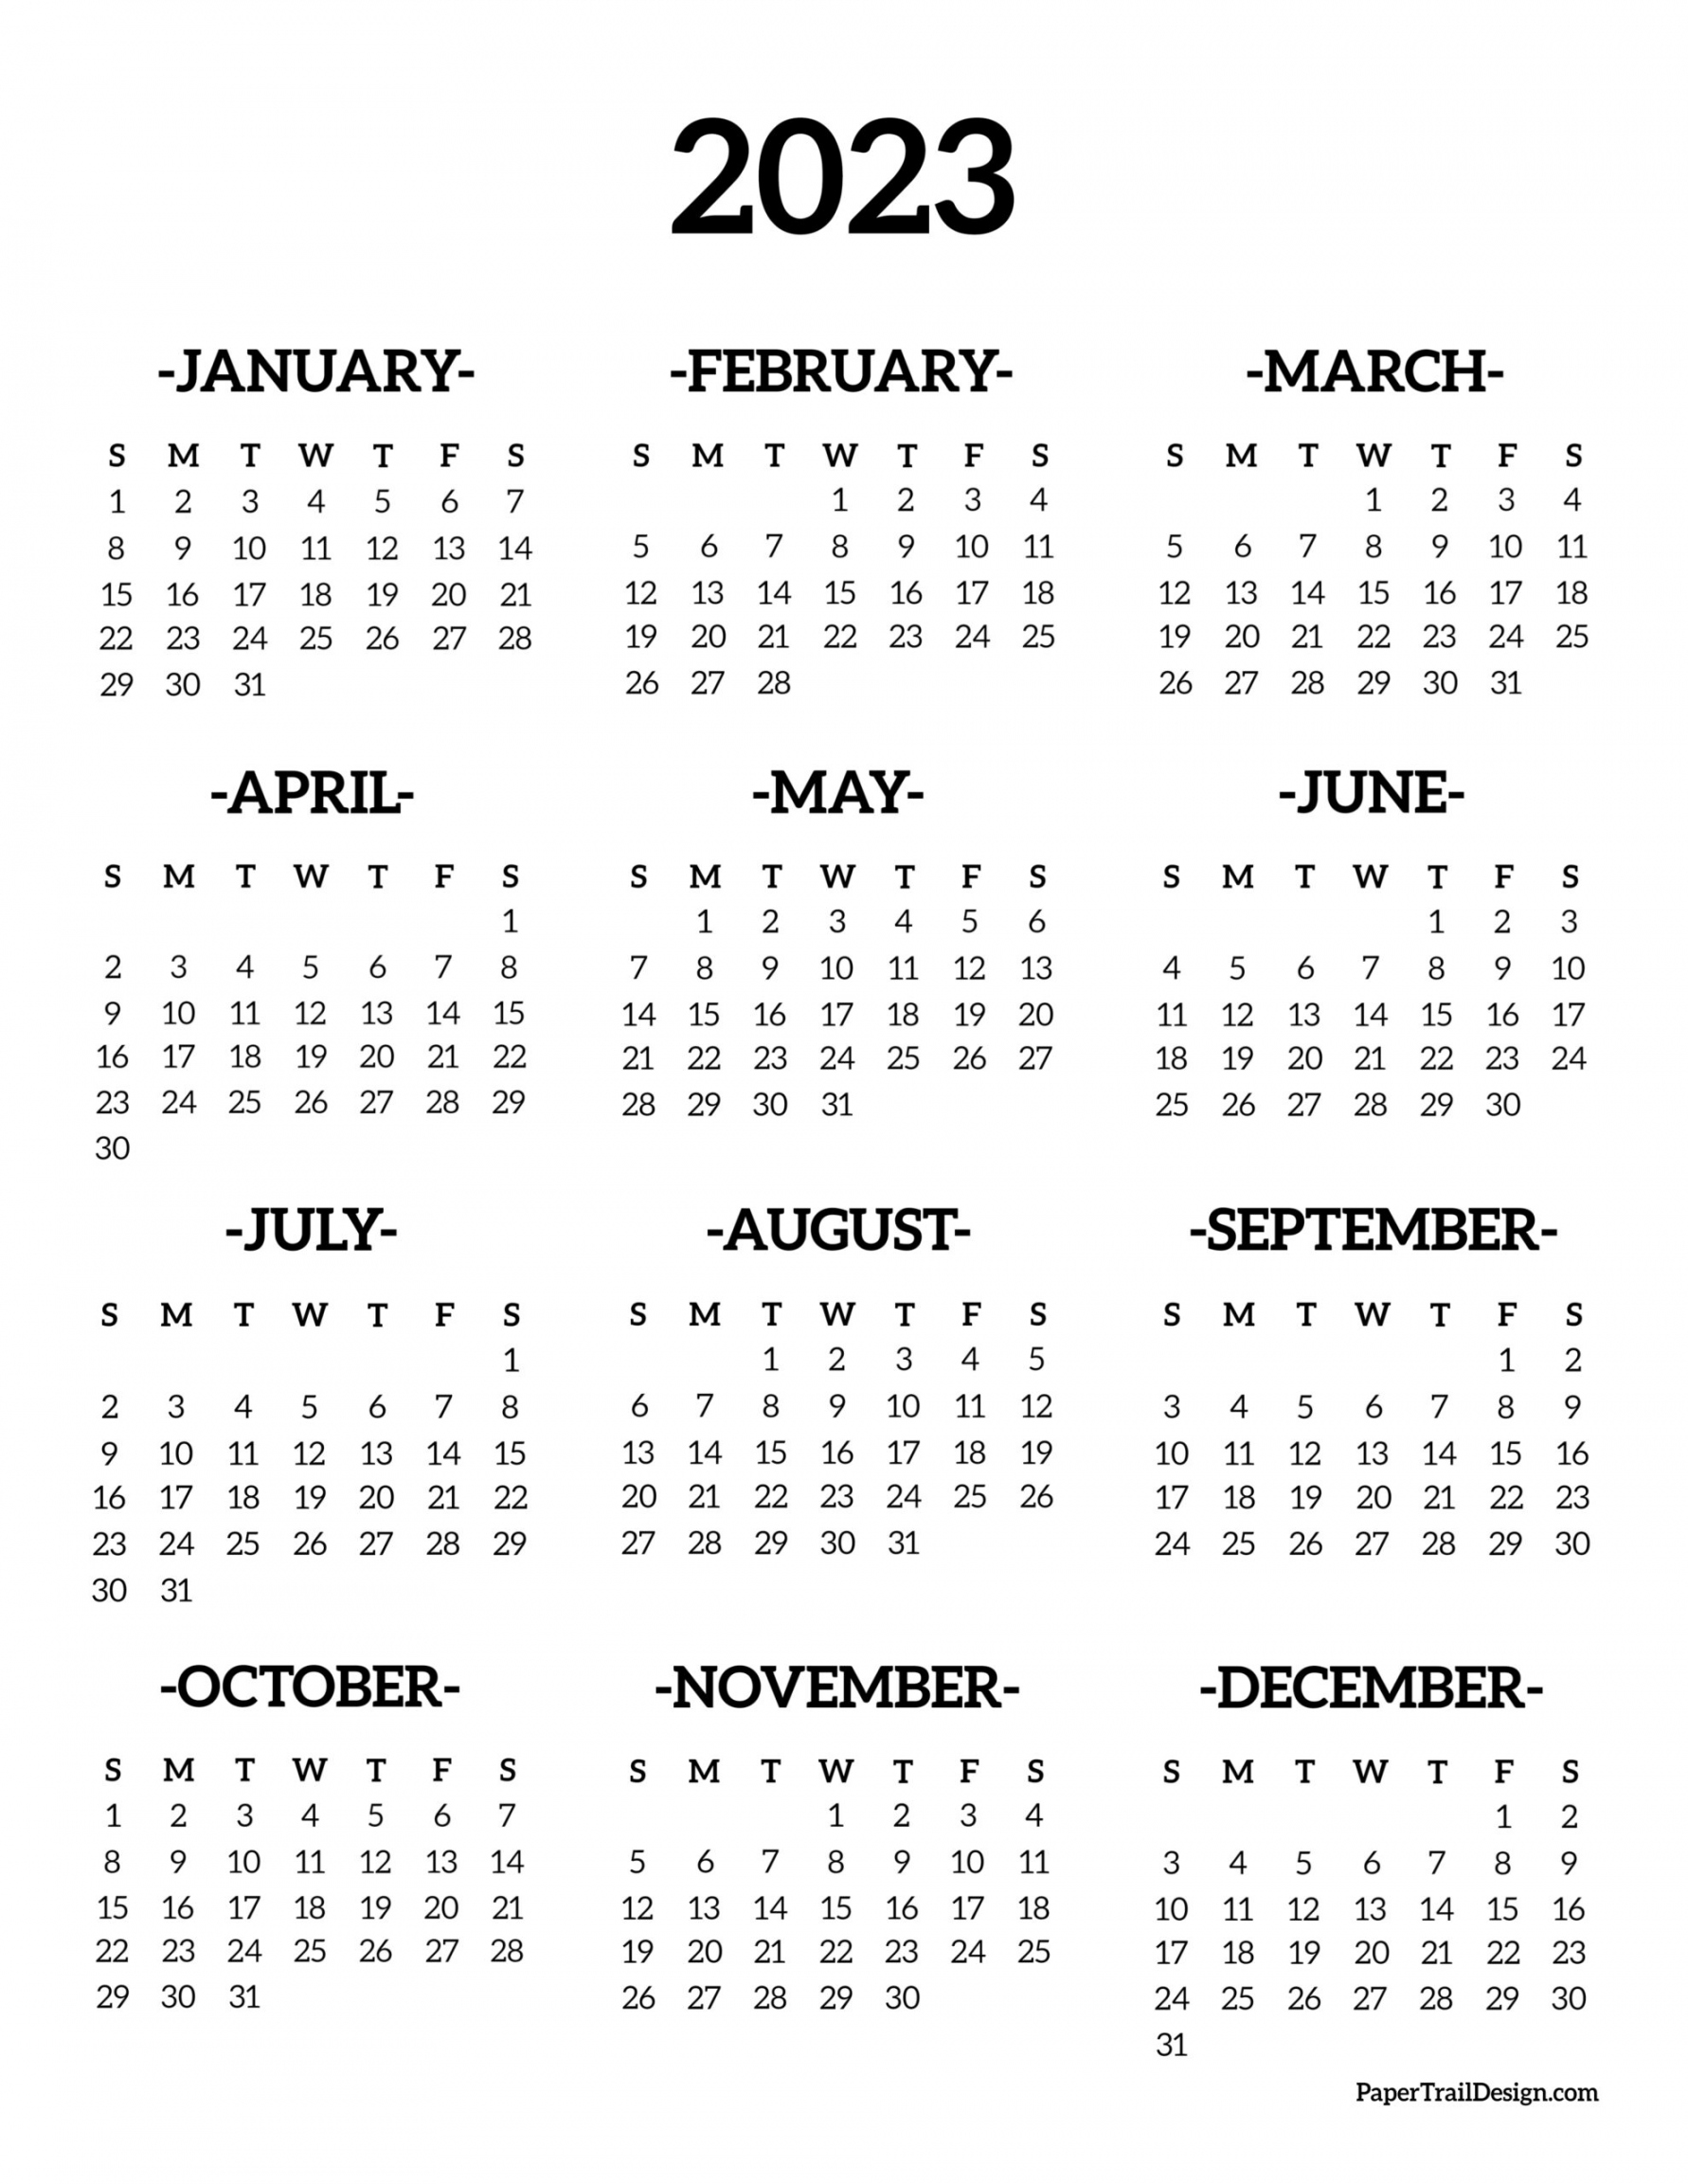 2023 Calendar Printable Free - Printable - Calendar  Printable One Page - Paper Trail Design